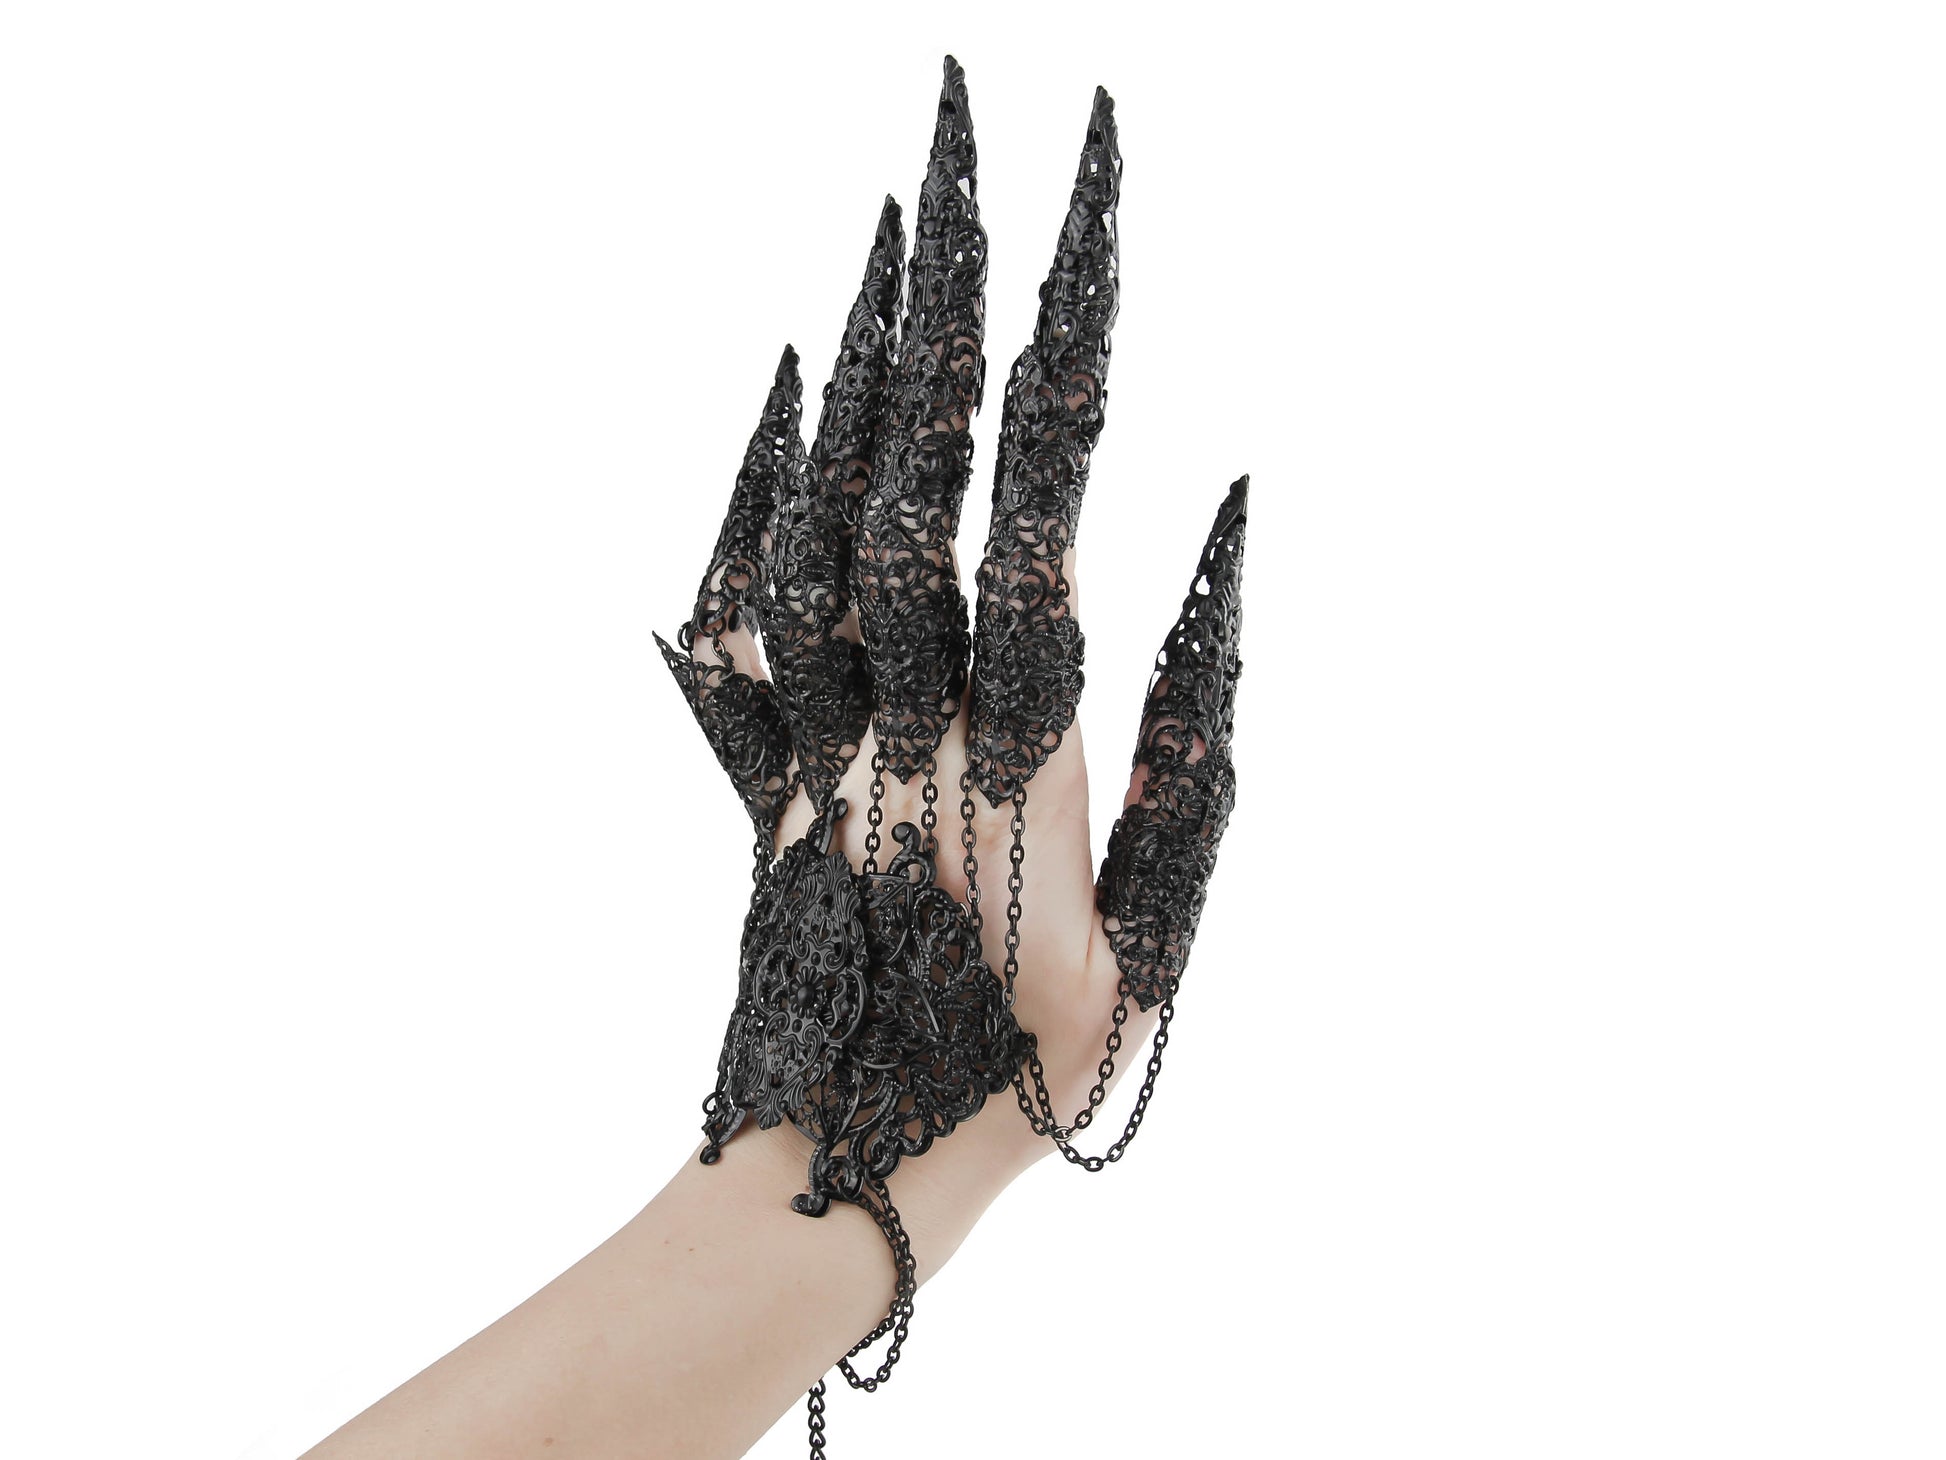 A hand dramatically showcases Myril Jewels' black lace finger armor, intertwined with chains, perfect for gothic-chic, neo-gothic, and whimsigoth styles. This handcrafted piece is a quintessential accessory for those who revel in witchcore aesthetics, making it an ideal selection for Halloween or punk fashion statements.